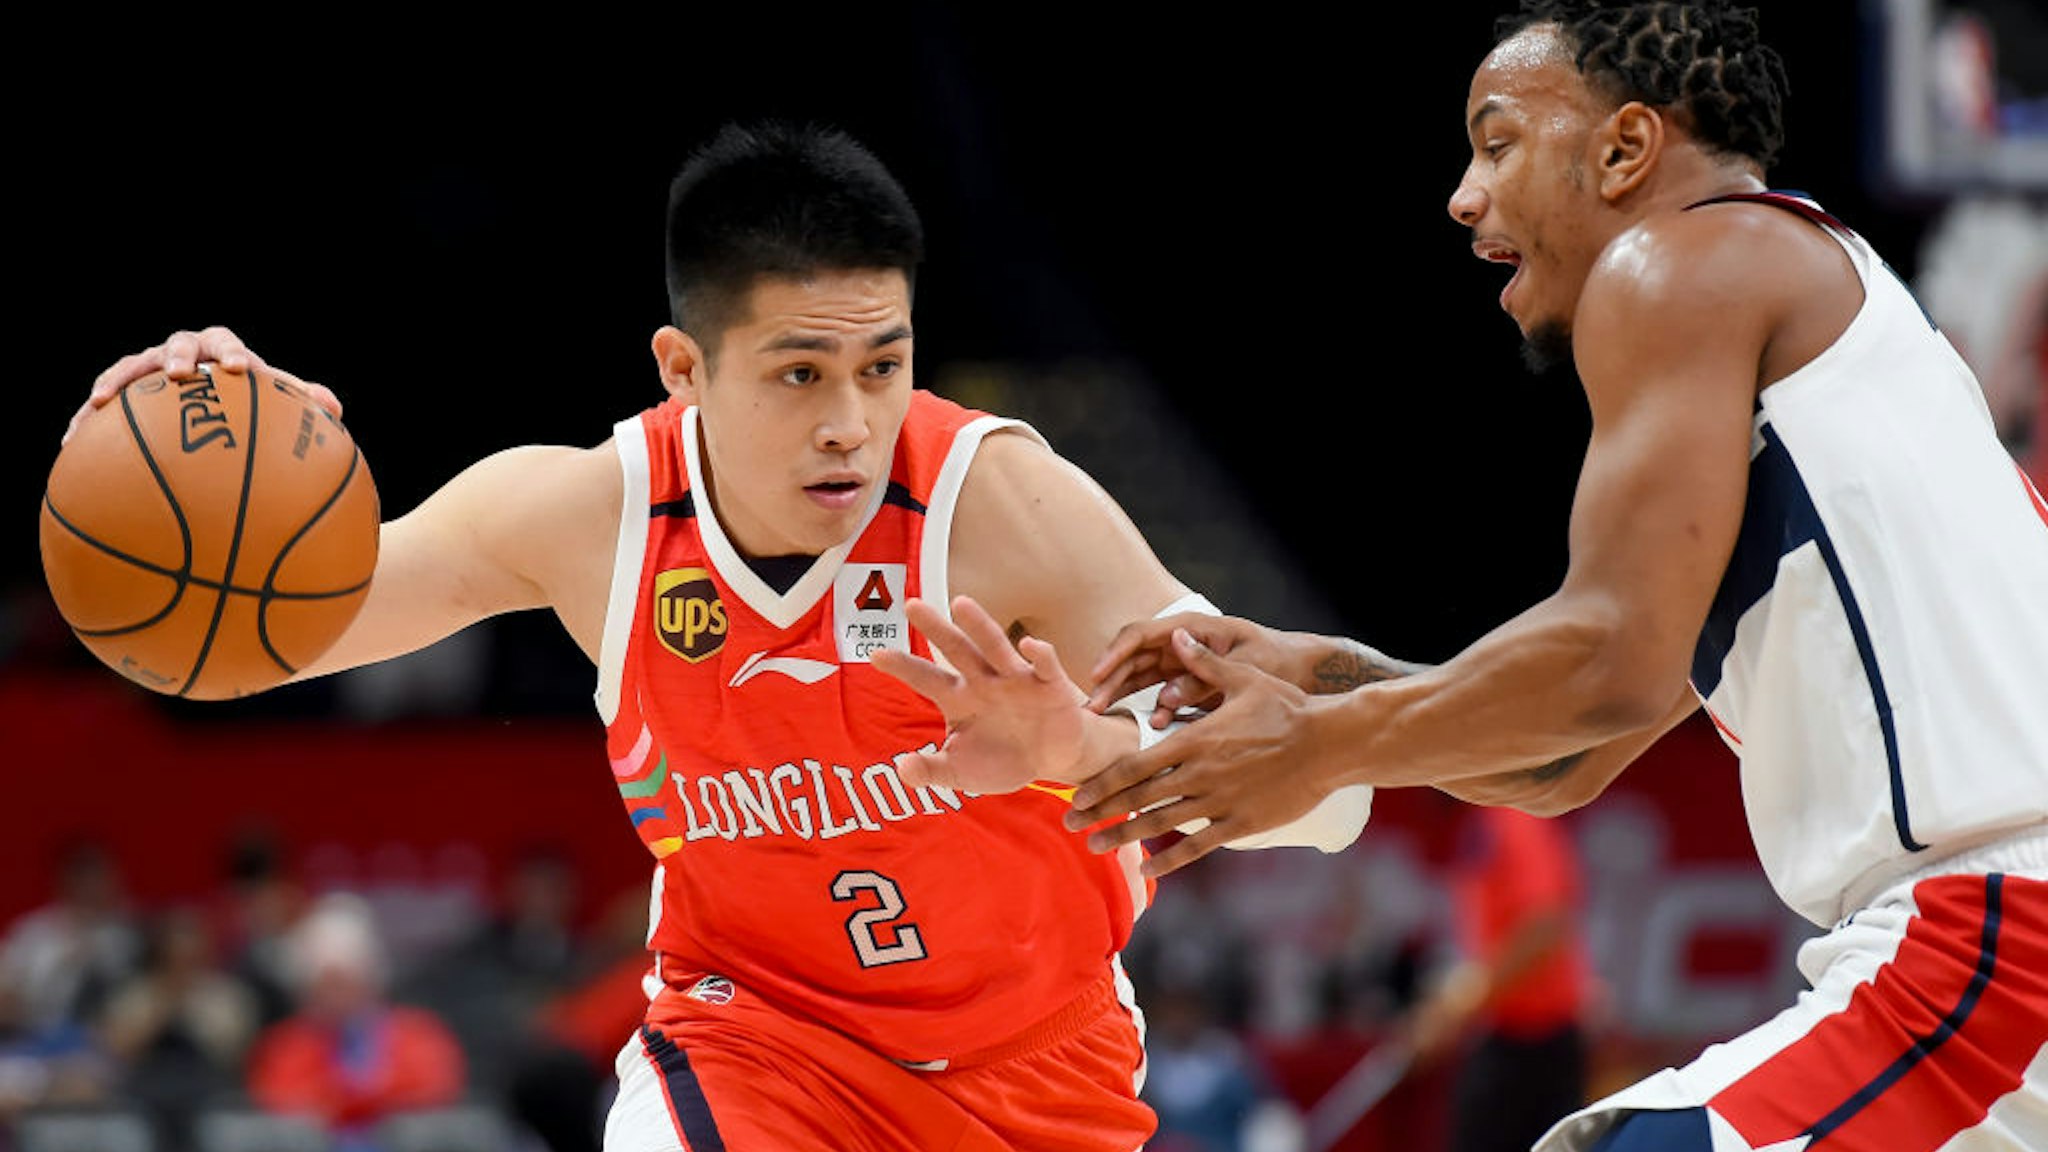 WASHINGTON, DC - OCTOBER 09: Ying-Chun Chen #2 of the Guangzhou Long-Lions drives against Justin Robinson #5 of the Washington Wizards during the first half at Capital One Arena on October 9, 2019 in Washington, DC.